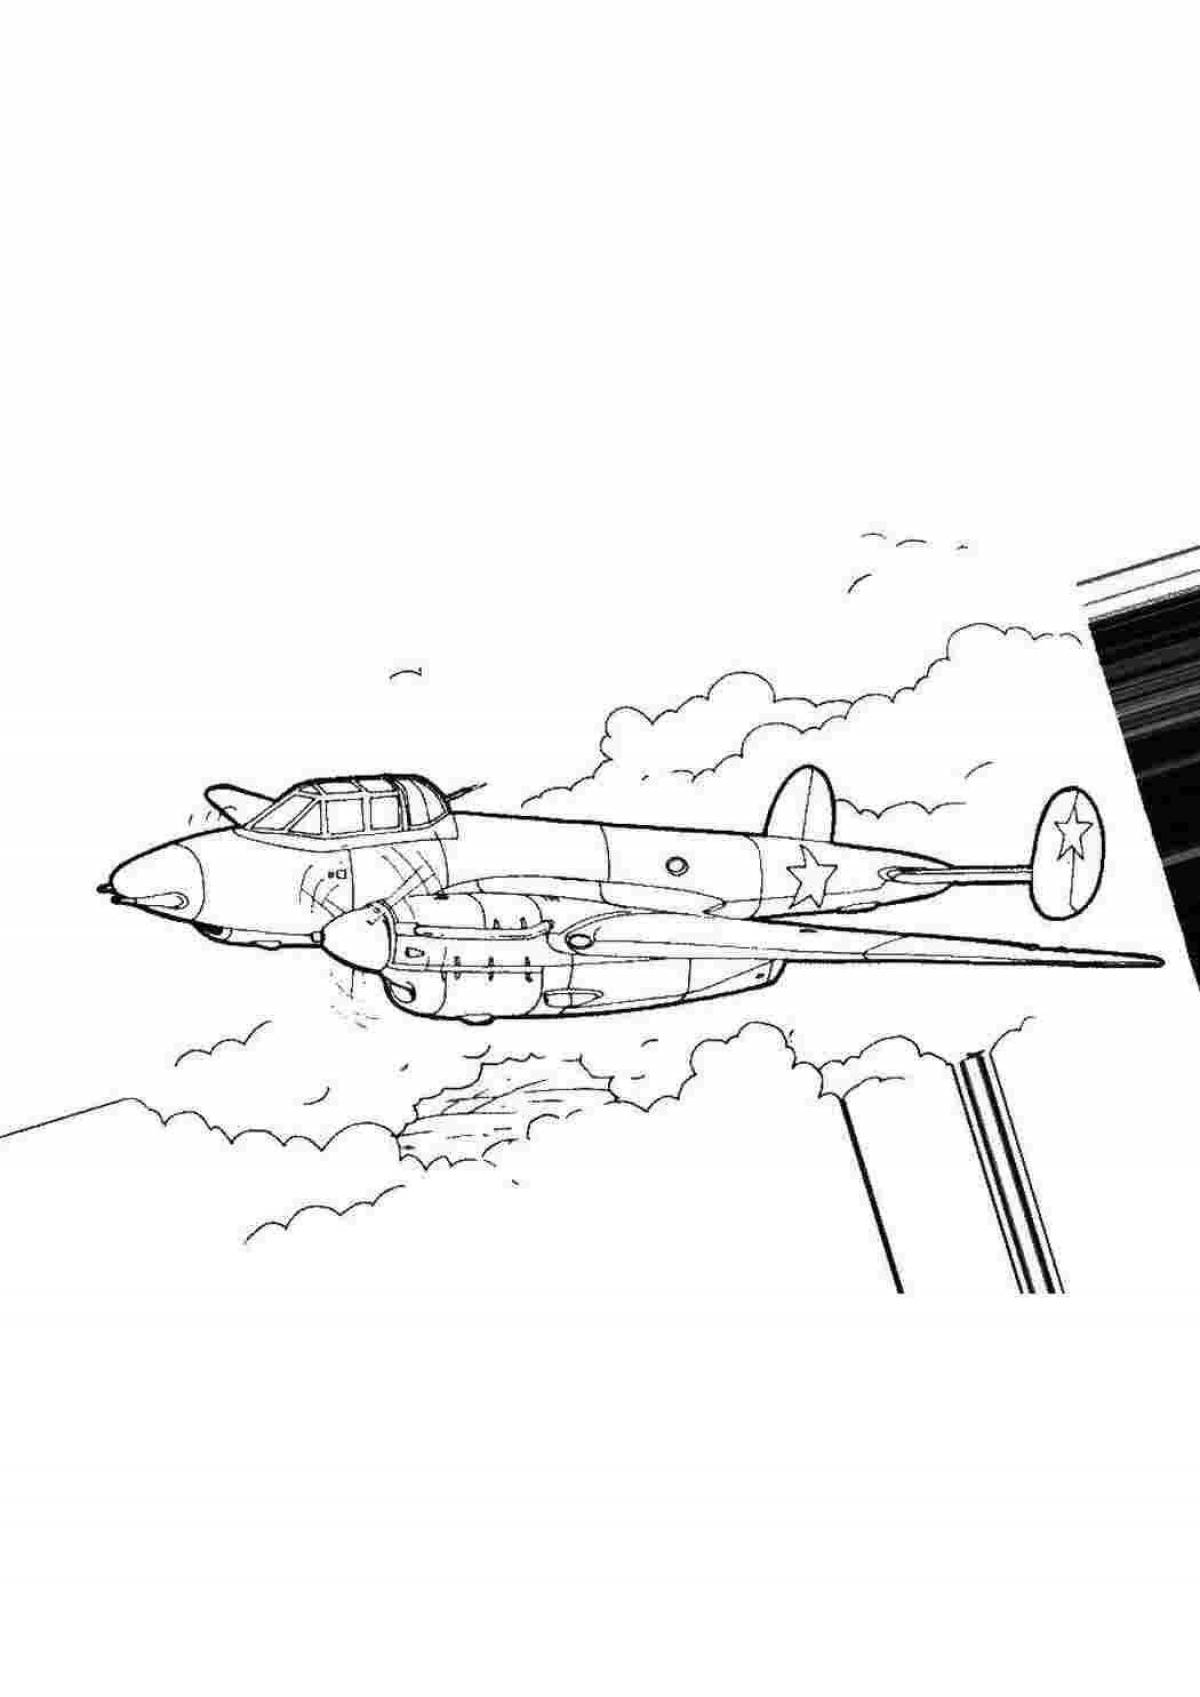 Flawless silt 2 aircraft coloring page